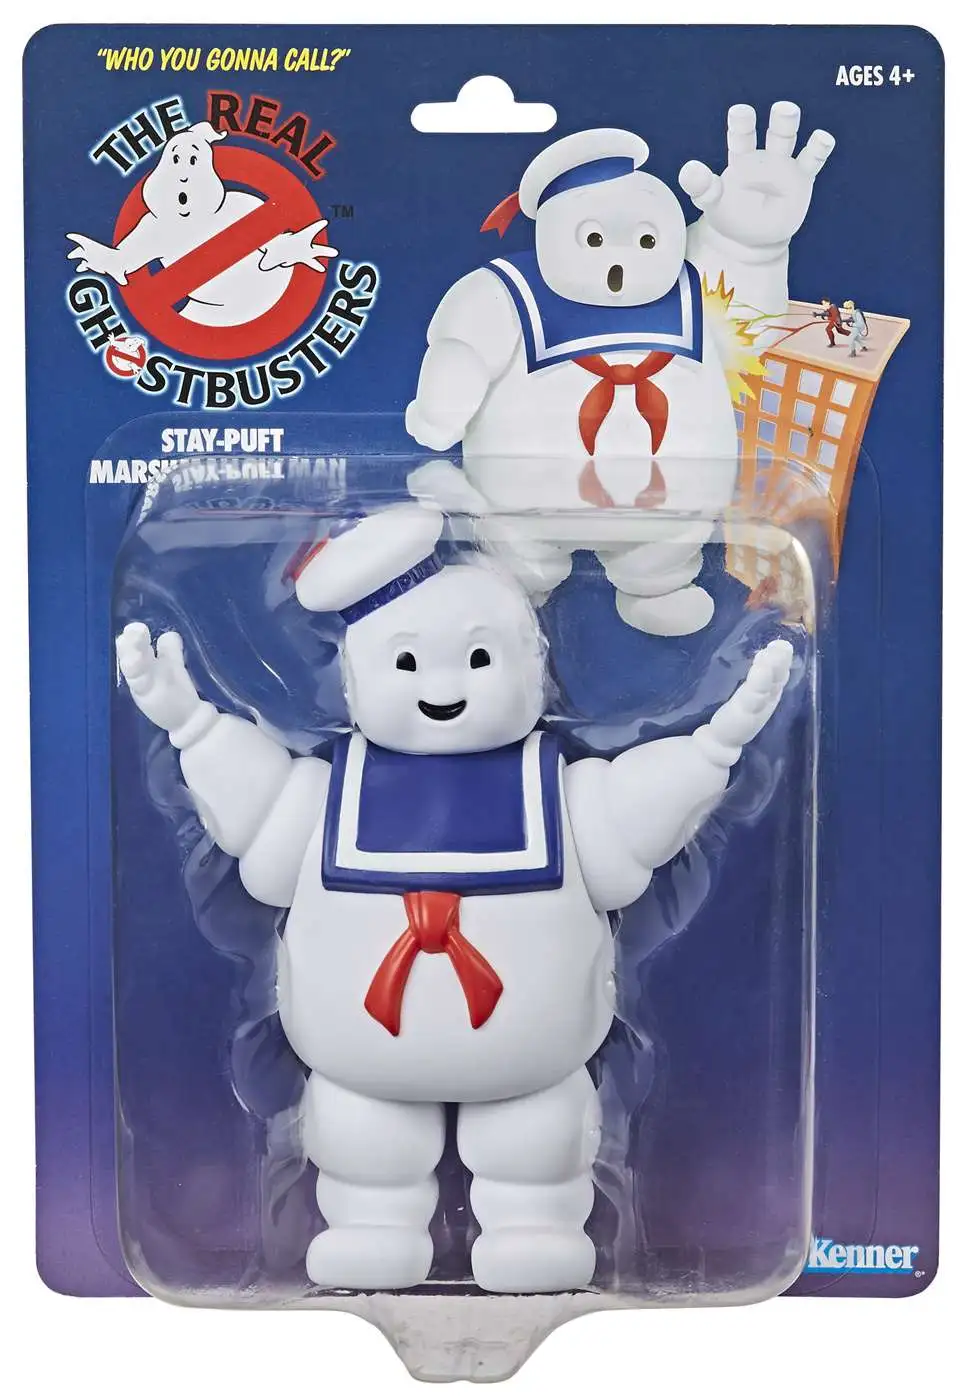 Ghostbusters Stay Puft Marshmallow Man Karate Loot Crate DX Exclusive 6" Figure 